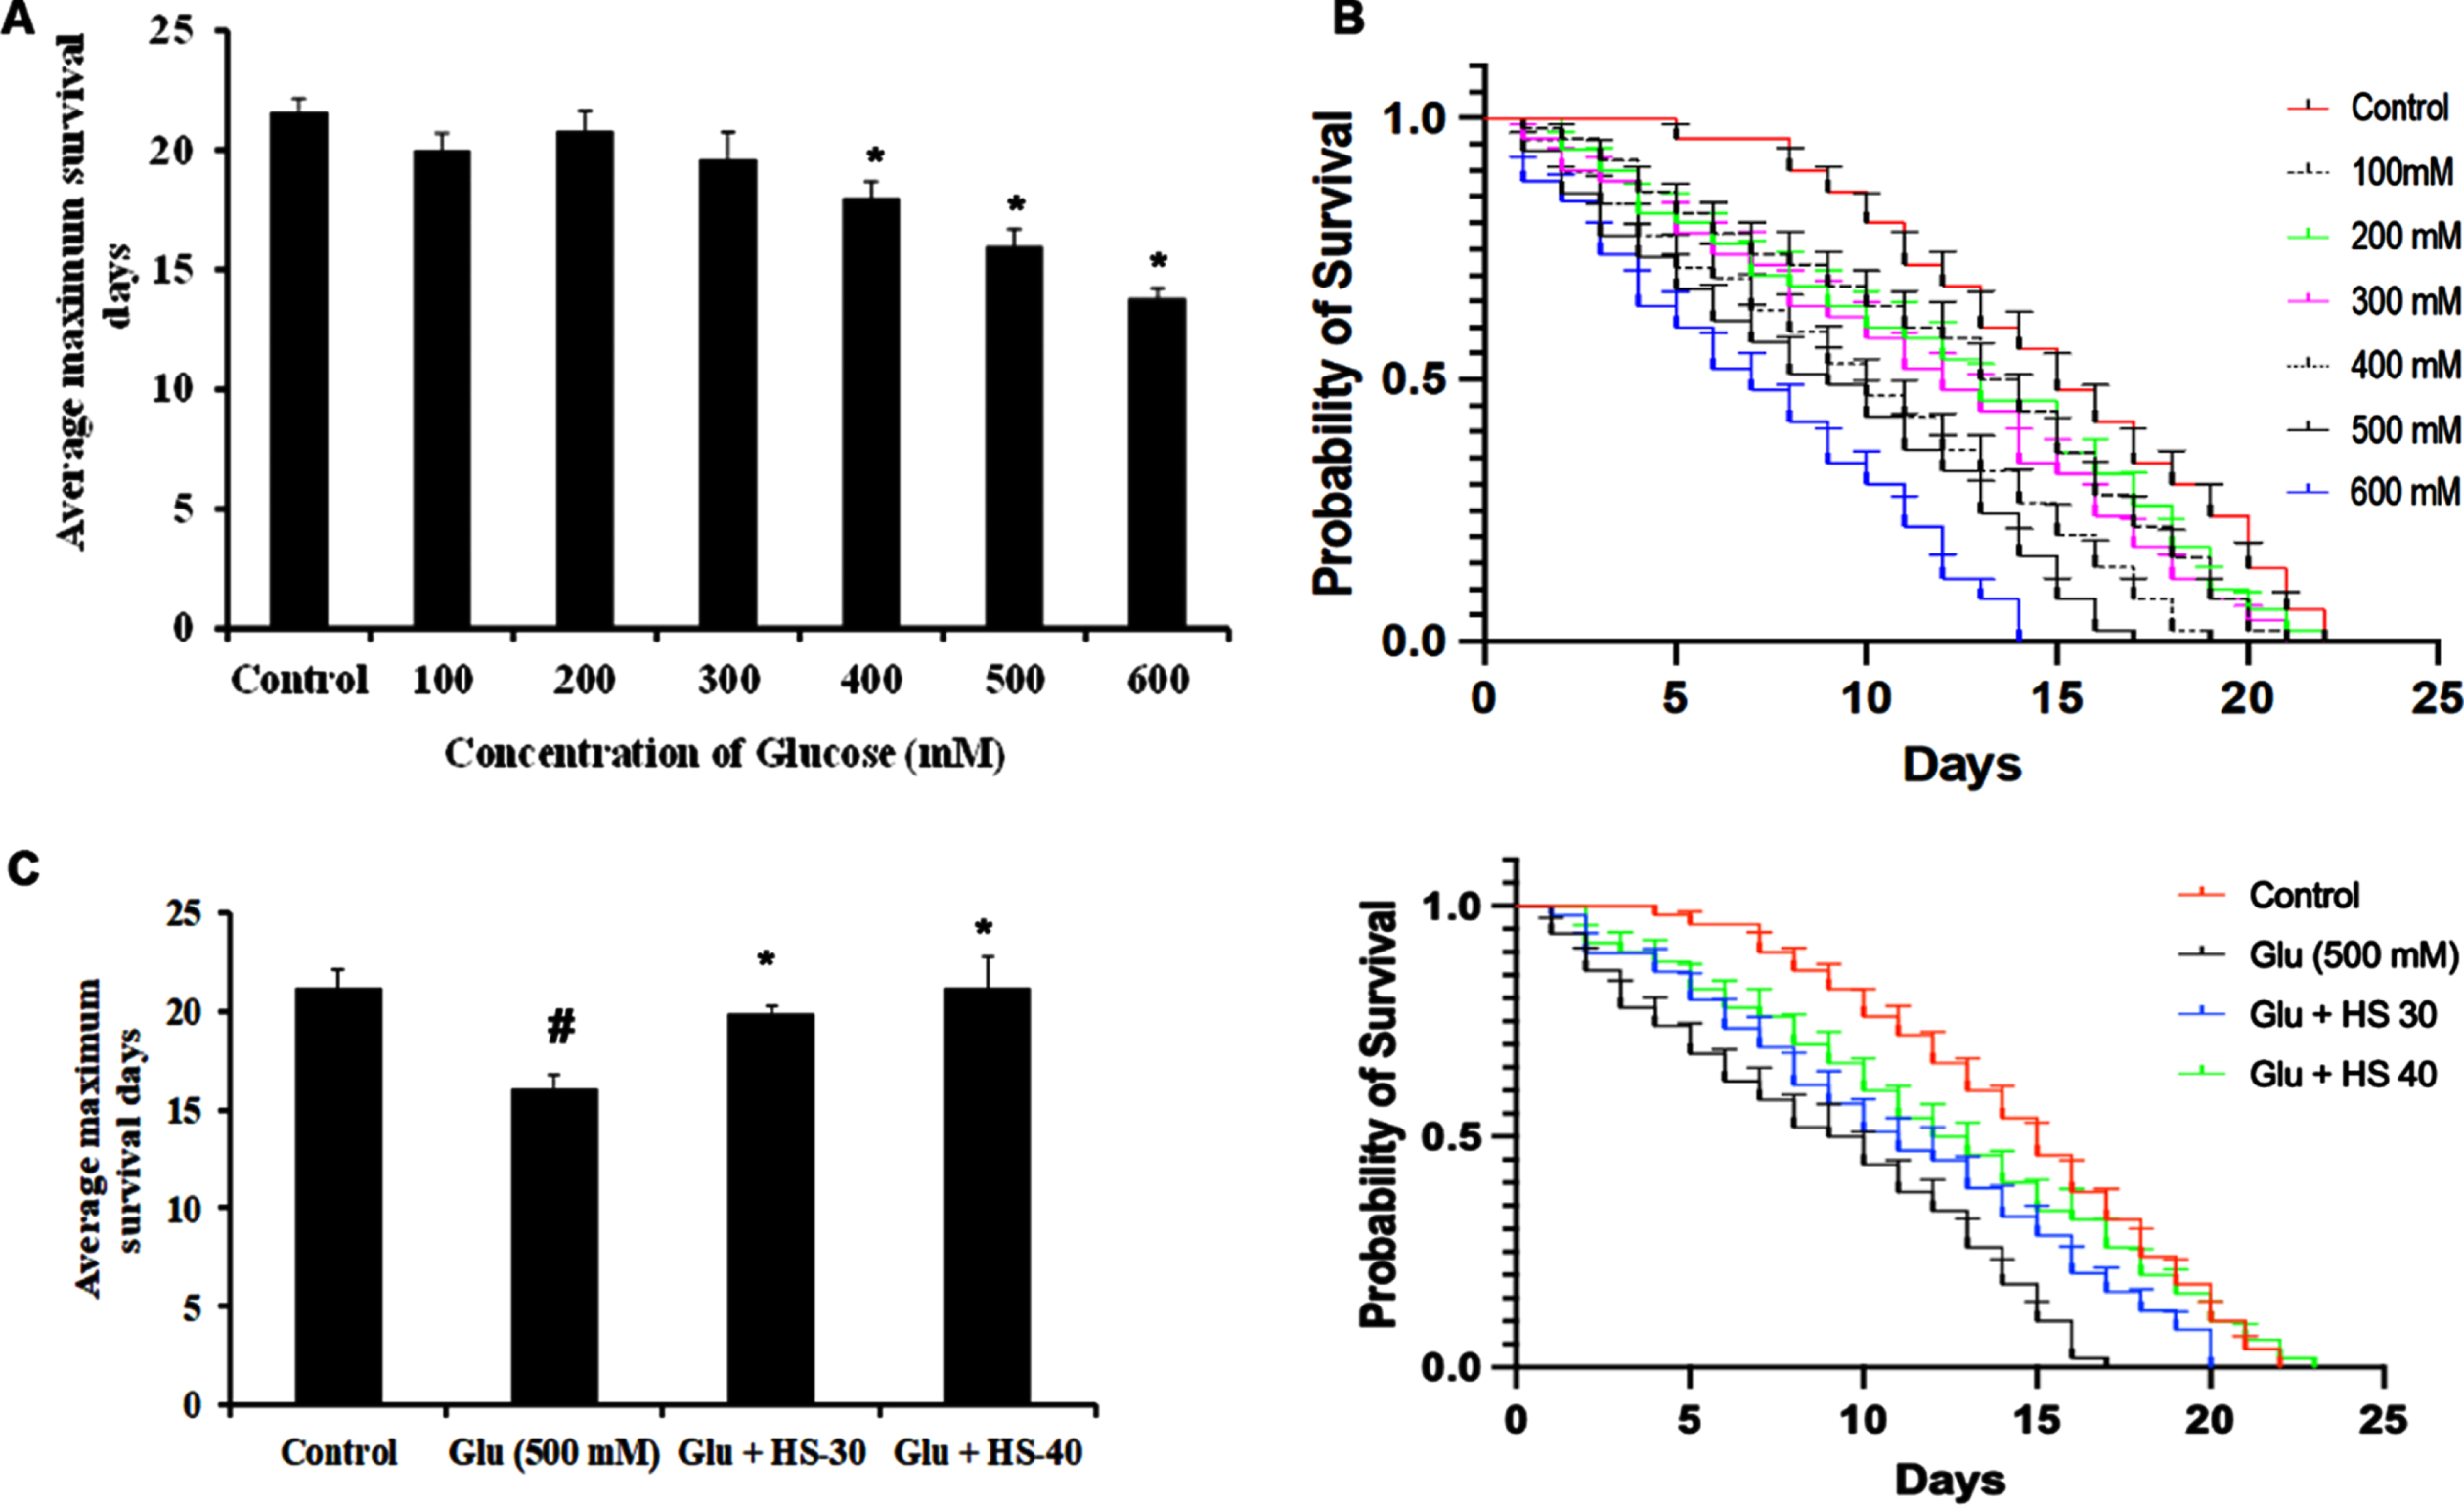 HS extract extends lifespan in wild type nematodes against high glucose-induced toxicity (A) Glucose treatment in a dose-dependent manner reduced the average lifespan of N2 nematodes (B) Plots representing a reduction in life span in N2 nematodes upon treatment with glucose (100–600 mM) (C) HS extract increased the average lifespan of N2 worms against high glucose treatment (500 mM) (D) Plots showing lifespan extension of N2 worms by HS against high glucose (significance level at p < 0.05; # Controls vs high glucose; * High glucose vs HS treatment; n = 5)